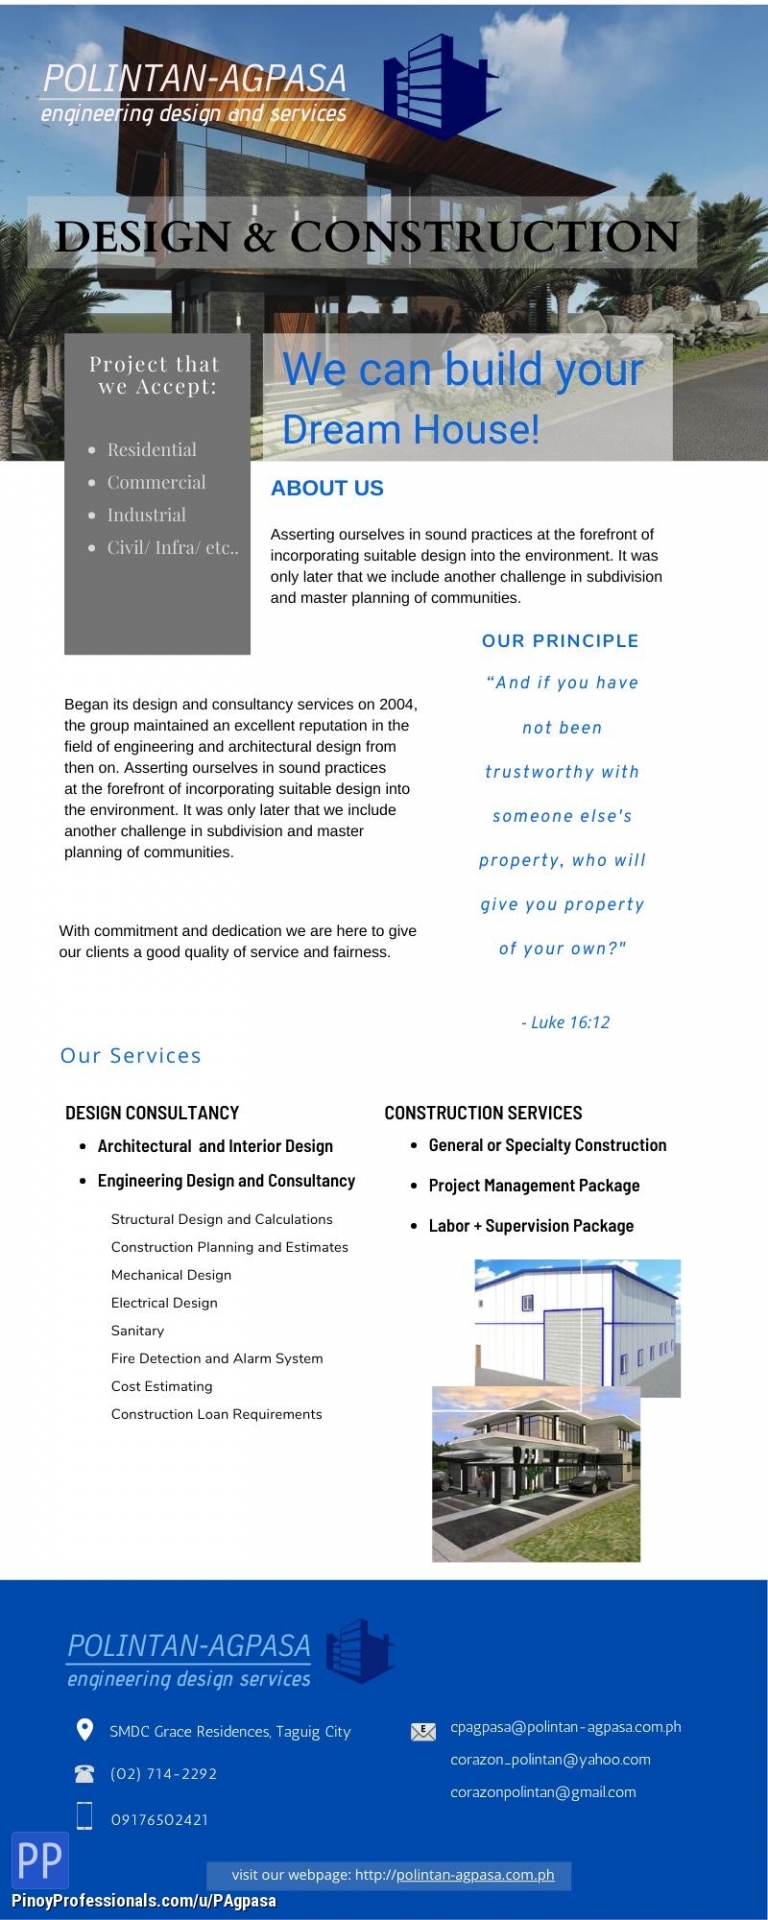 Engineers - Polintan-Agpasa Engineering and Architectural Design Services